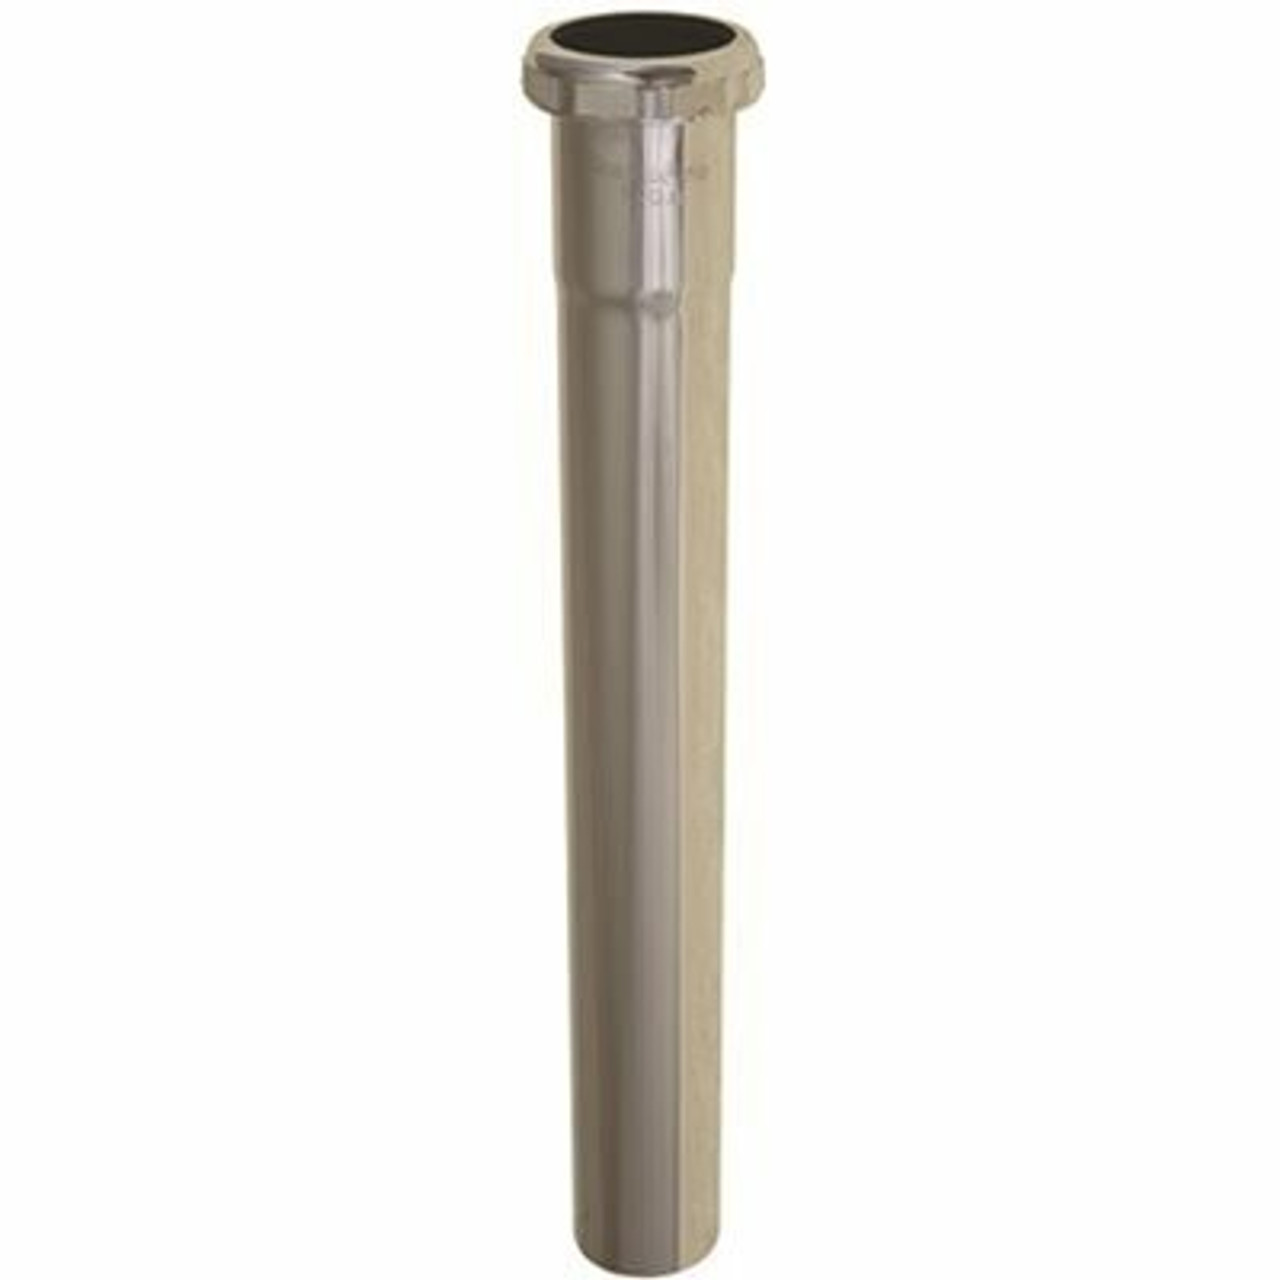 Premier 1-1/2 In. X 12 In. Brass Extension Tube With Slip Joint, Chrome, 22-Gauge